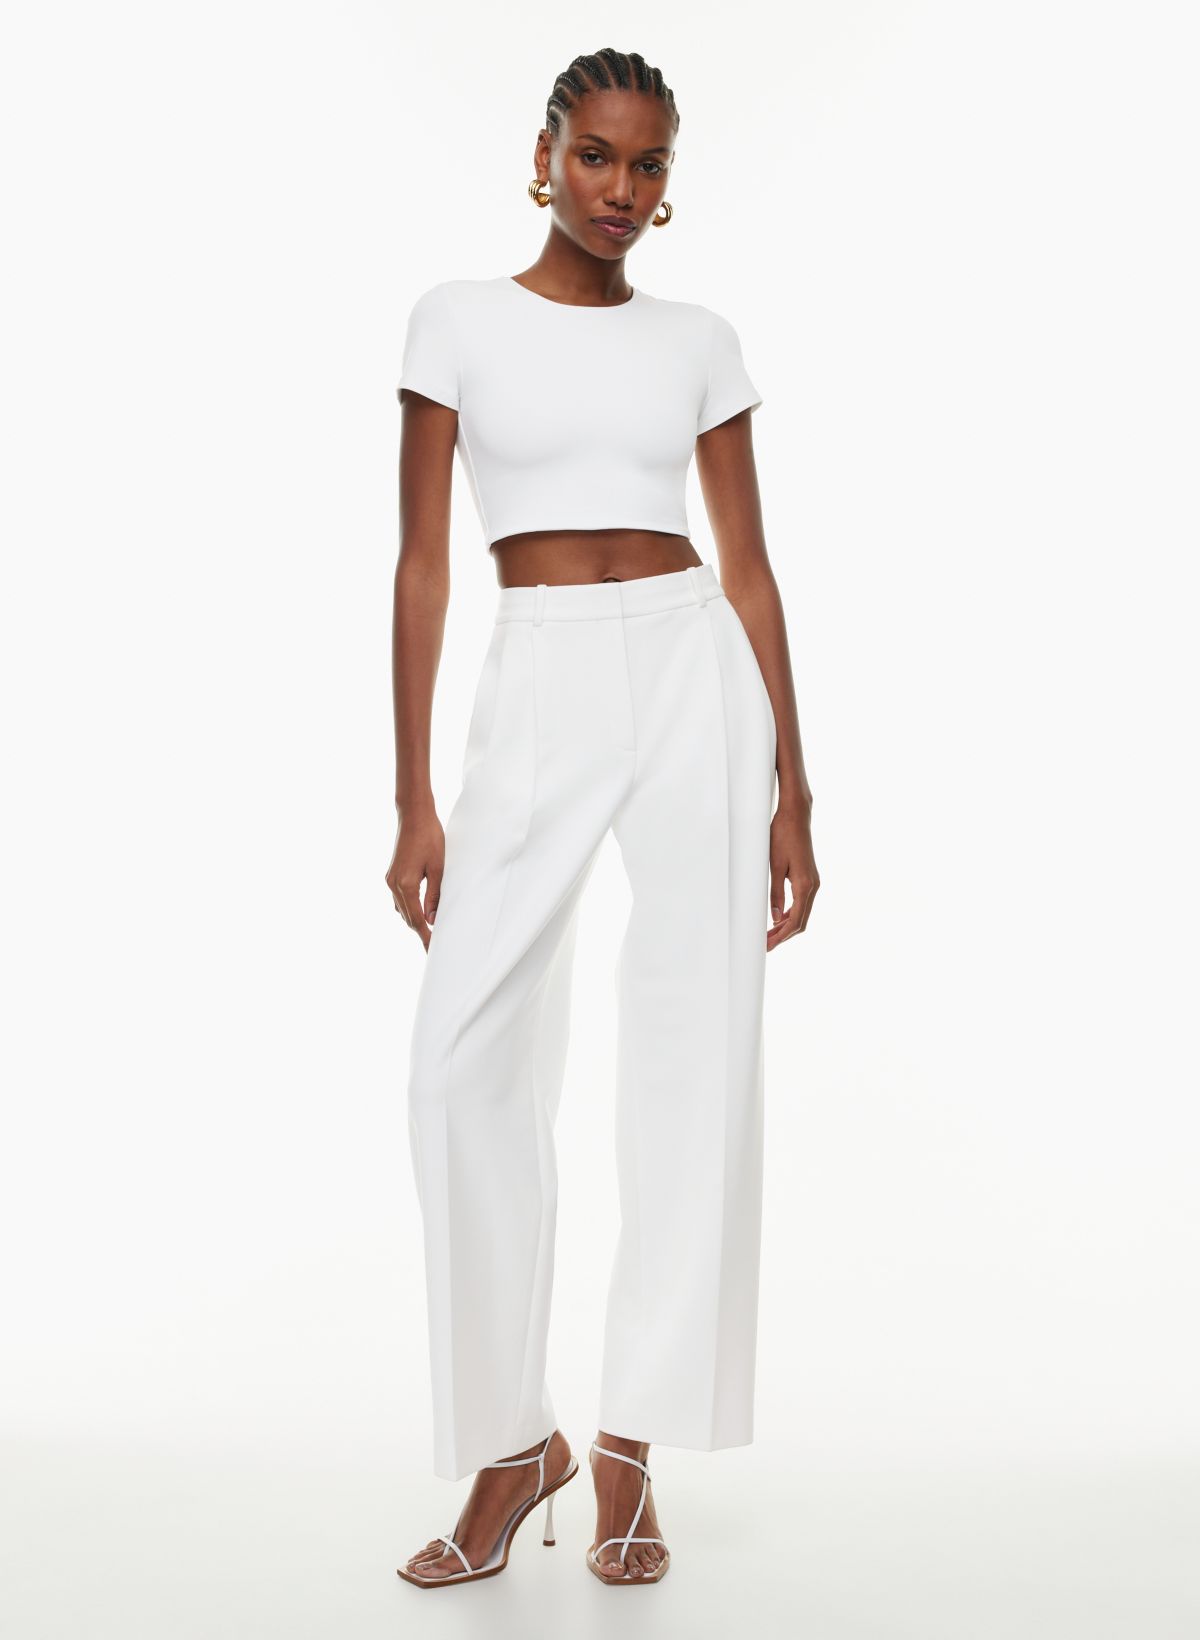 Zara Limited Contour Collection 11 Cropped Sweatshirt